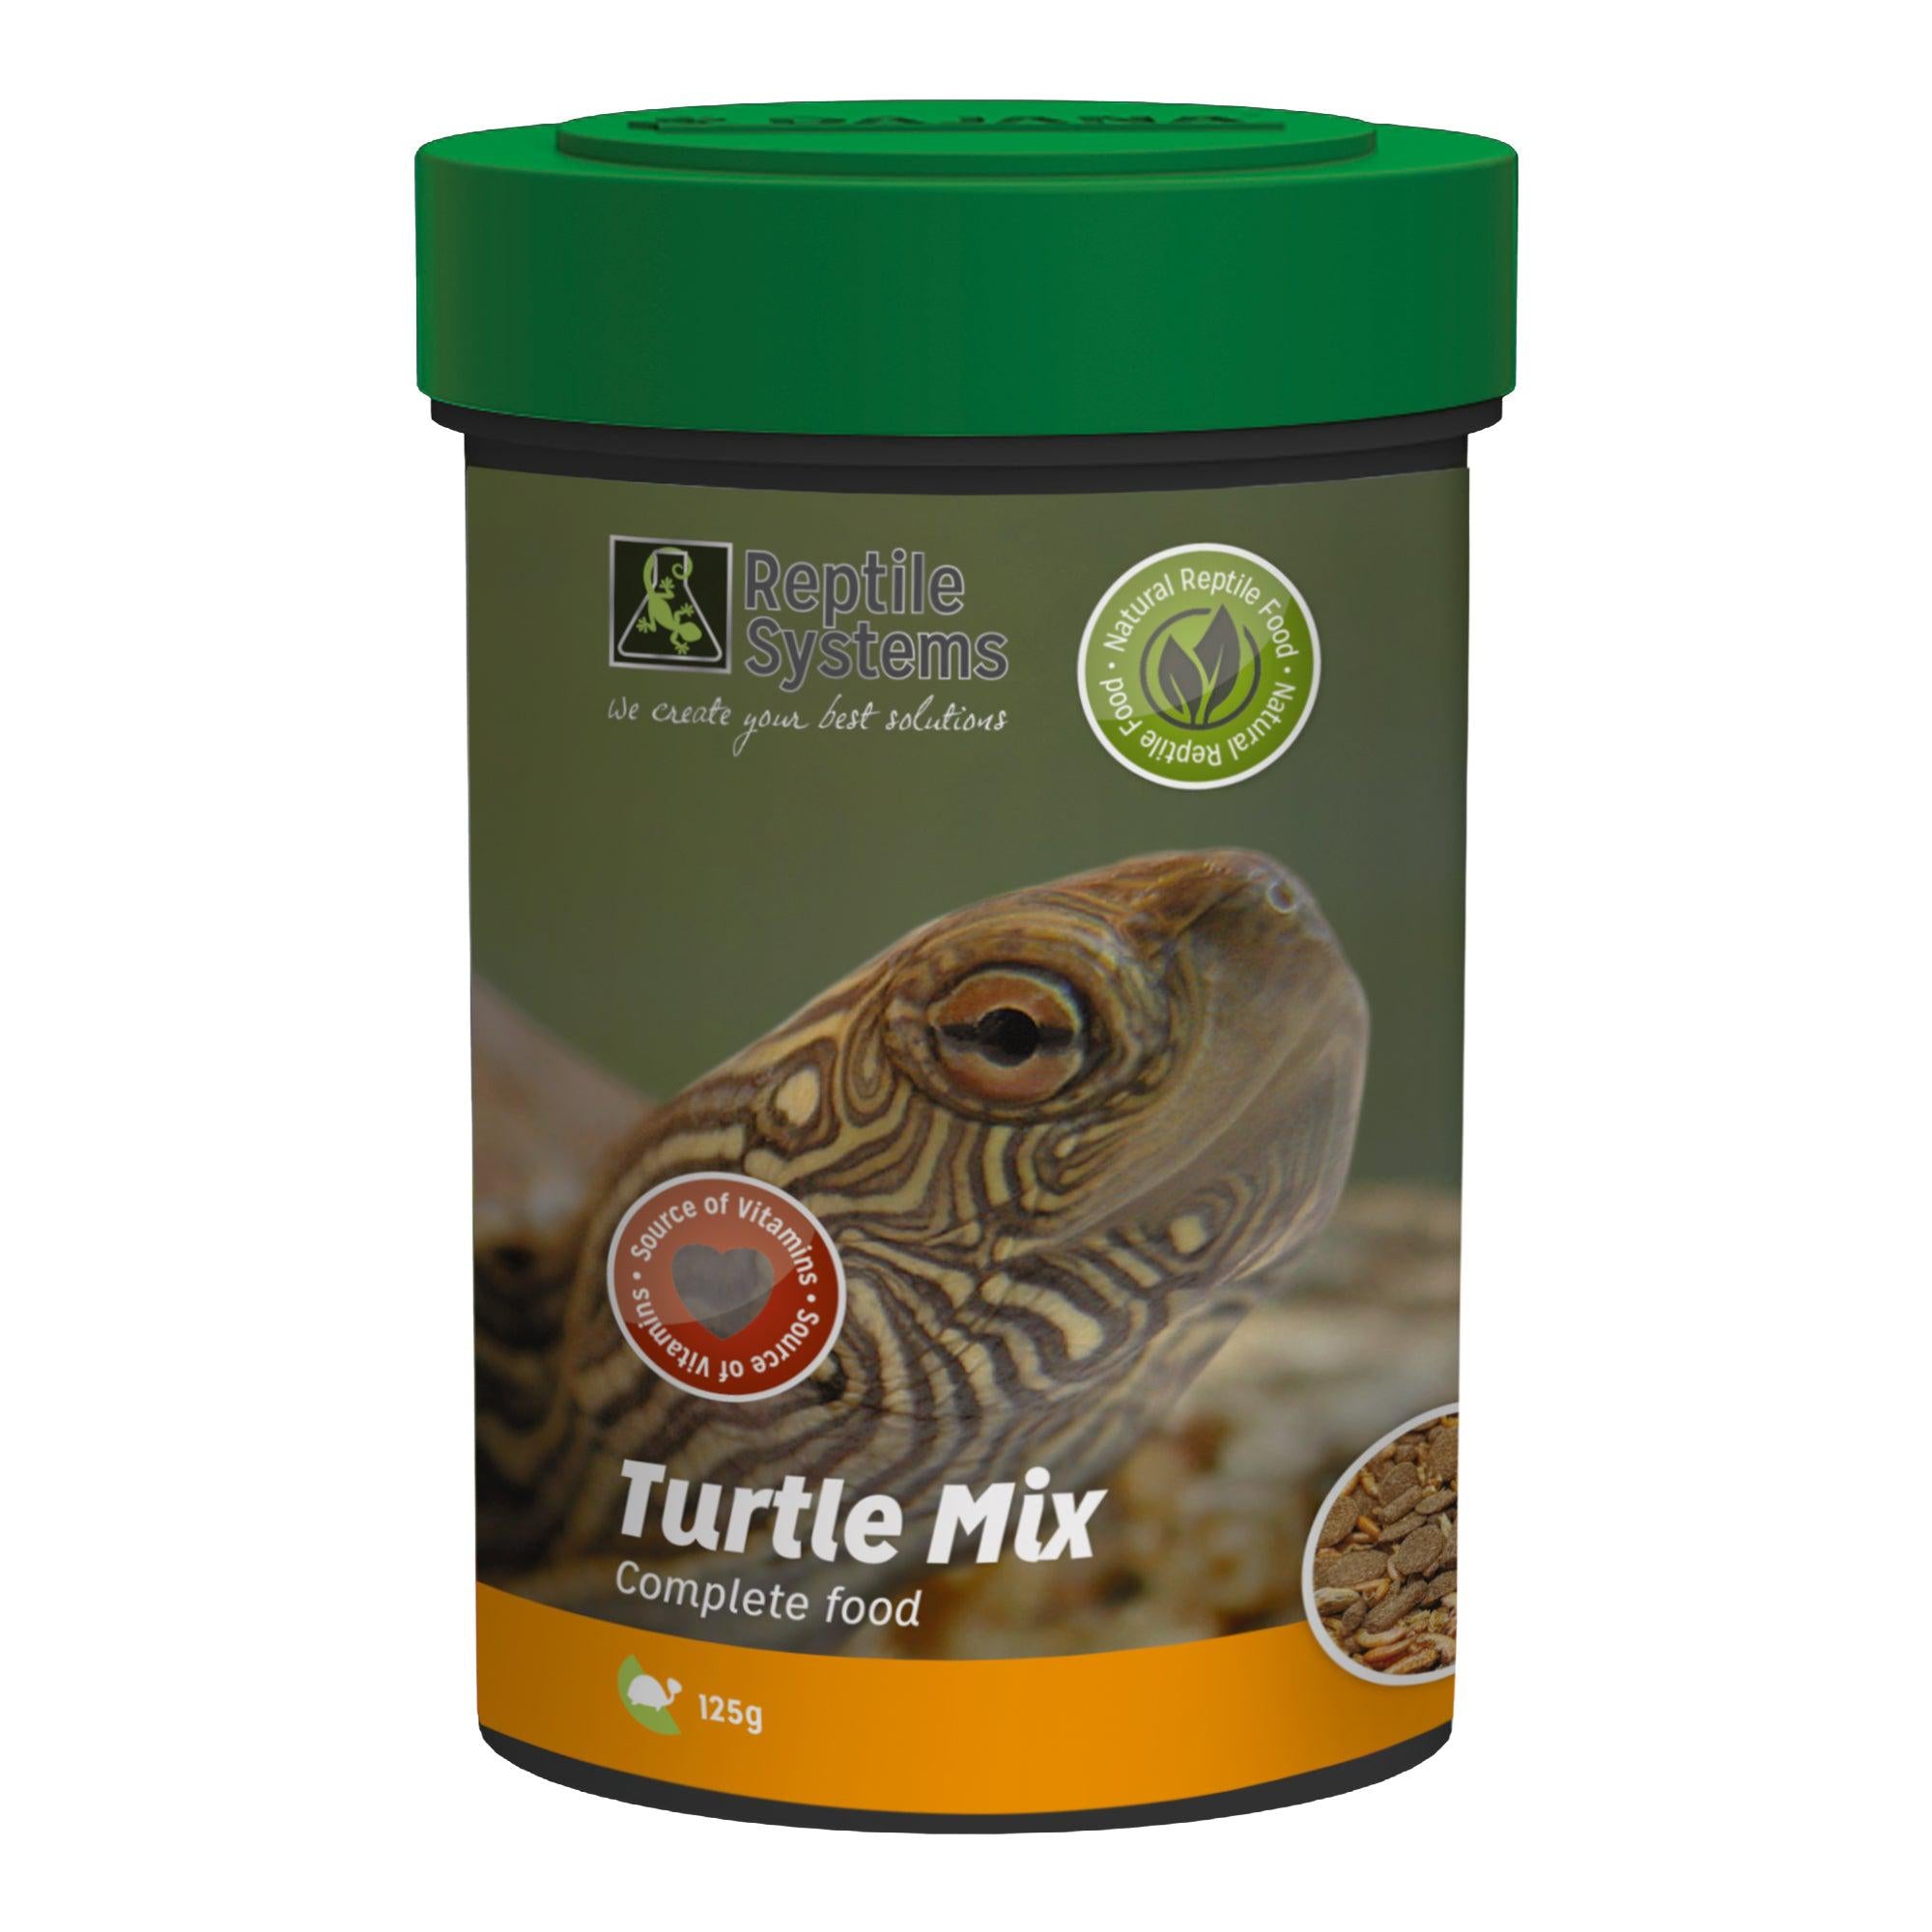 Reptile Systems Turtle Mix, 125g